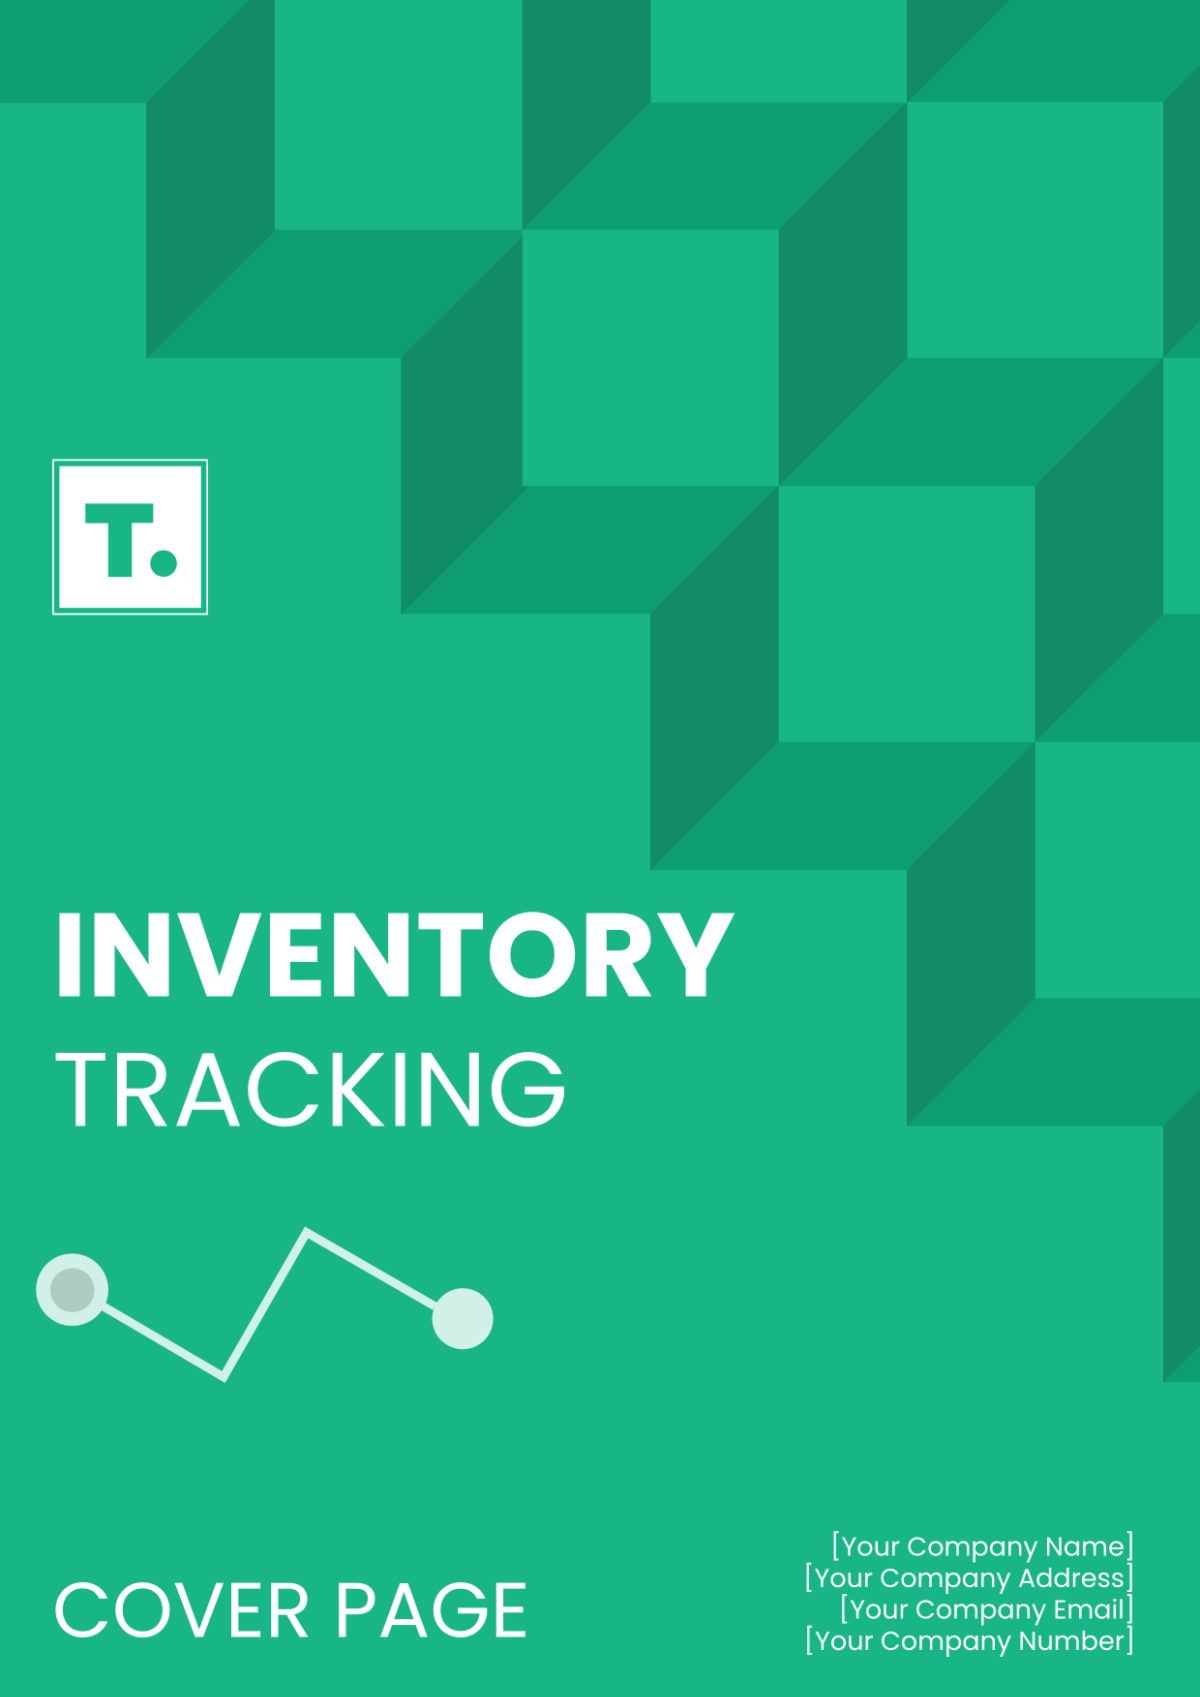 Inventory Tracking Cover Page